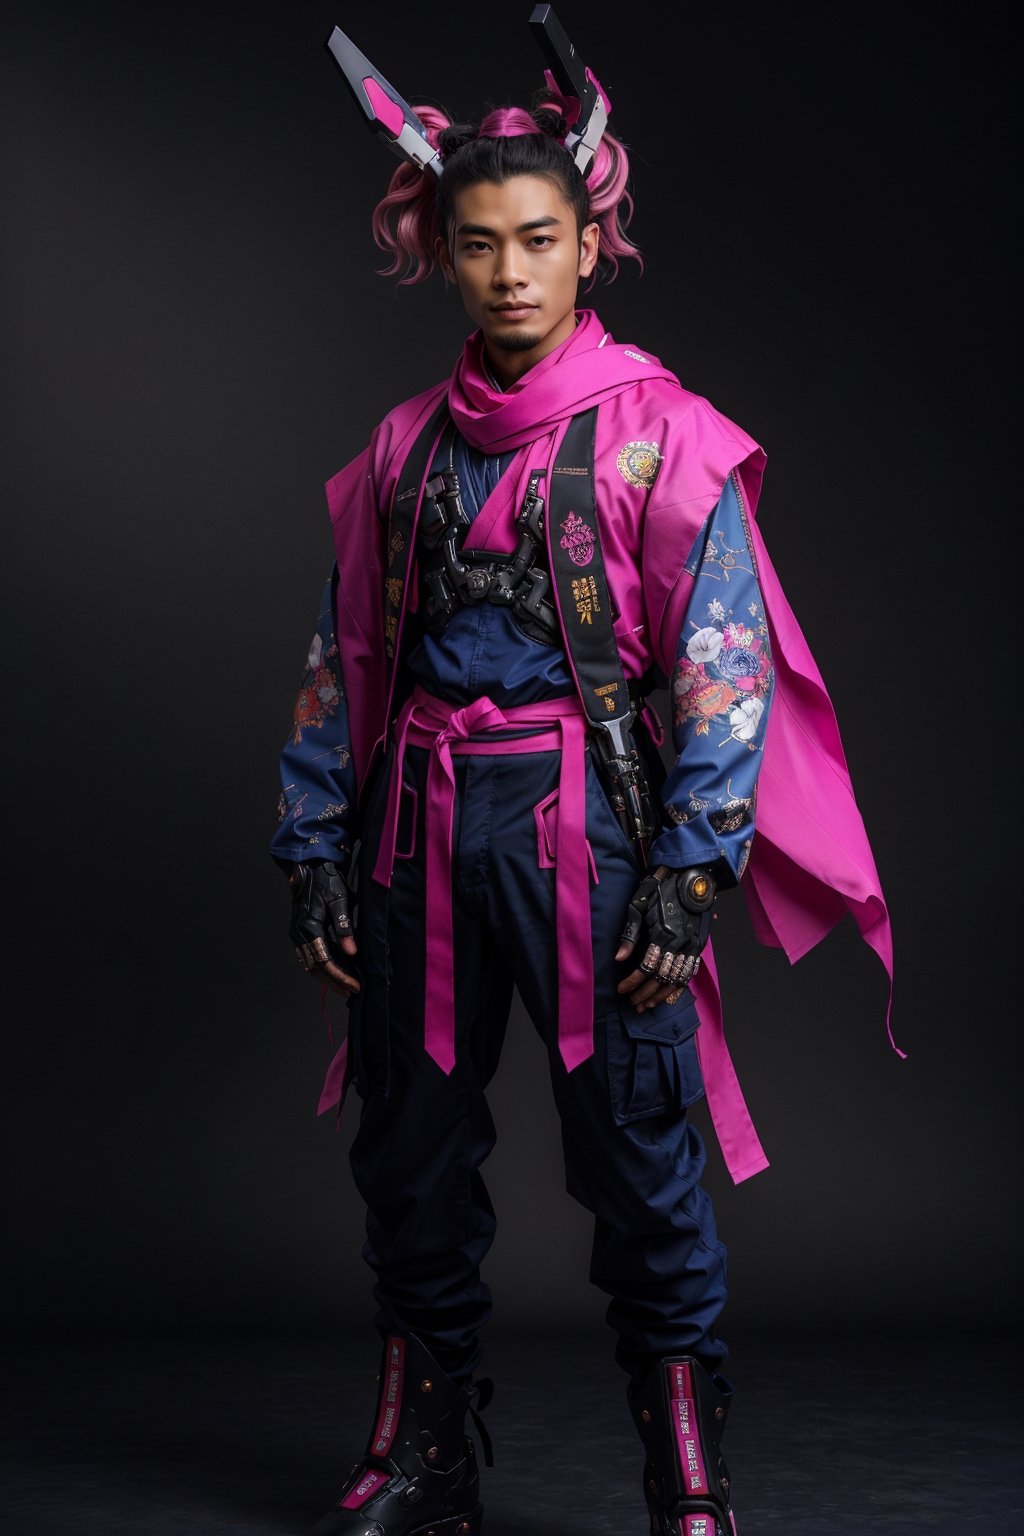 1male, (best quality,8K,highres,masterpiece, ultra-detailed, super colorful, vibrant, realistic, high-resolution), wide view, full picture head-to-toe, colorful portrait of an asian male with flawless anatomy, his left hand is detachable mechanical prosthetics hand, he is wearing a blue-coloured tactical kimono with no under-garment under it, baggy cargo pants, doctor marten's high boots, His tattoed skin is extremely detailed and realistic, with a natural and lifelike texture. ((His pink-colored wavy hair is tied in high-knot, man-bun)) The background is black. The lighting accentuates the contours of his face, adding depth and dimension to the portrait. The overall composition is masterfully done, showcasing the intricate details and achieving a high level of realism,Hair,zzmckzz,Mecha body,mecha,mecha musume,kimono,BJ_Gundam,haman karn,Rabbit ear,urban techwear,tech